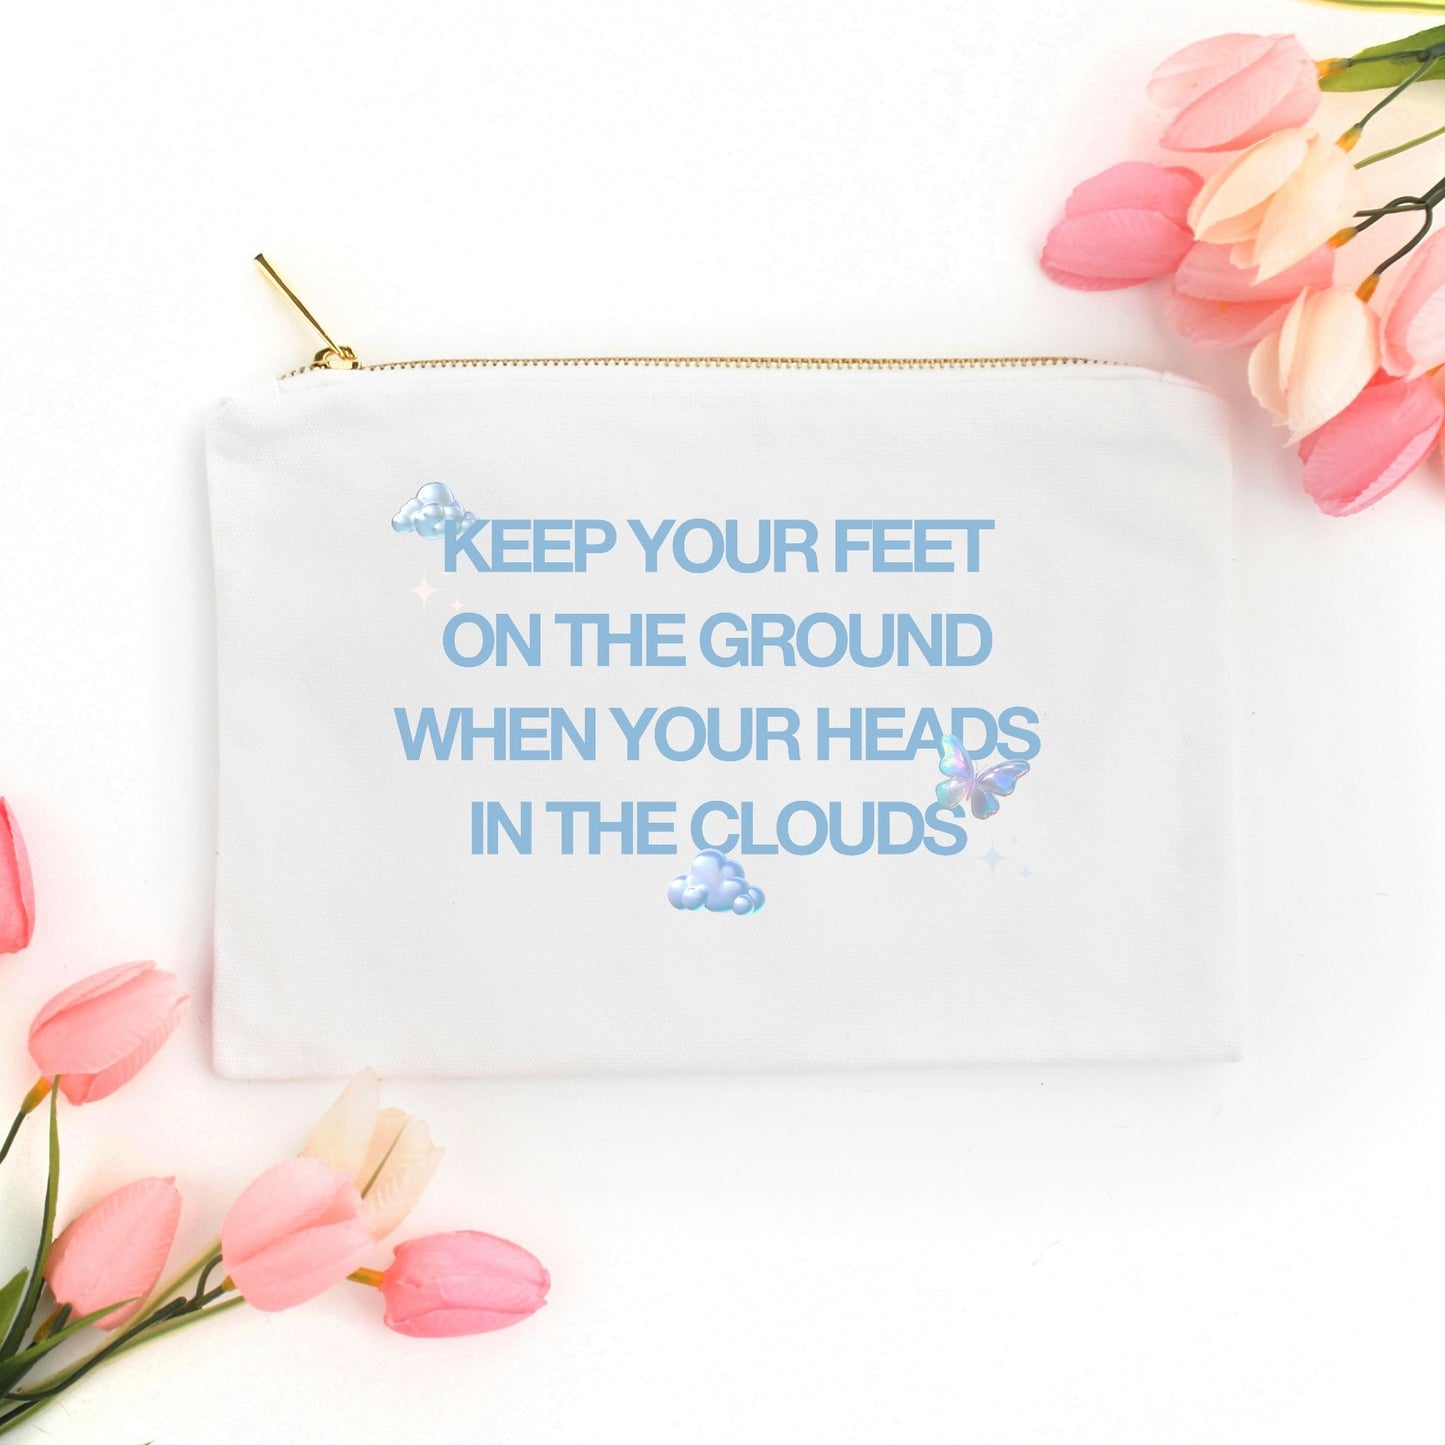 Head In The Clouds Cosmetic Bag